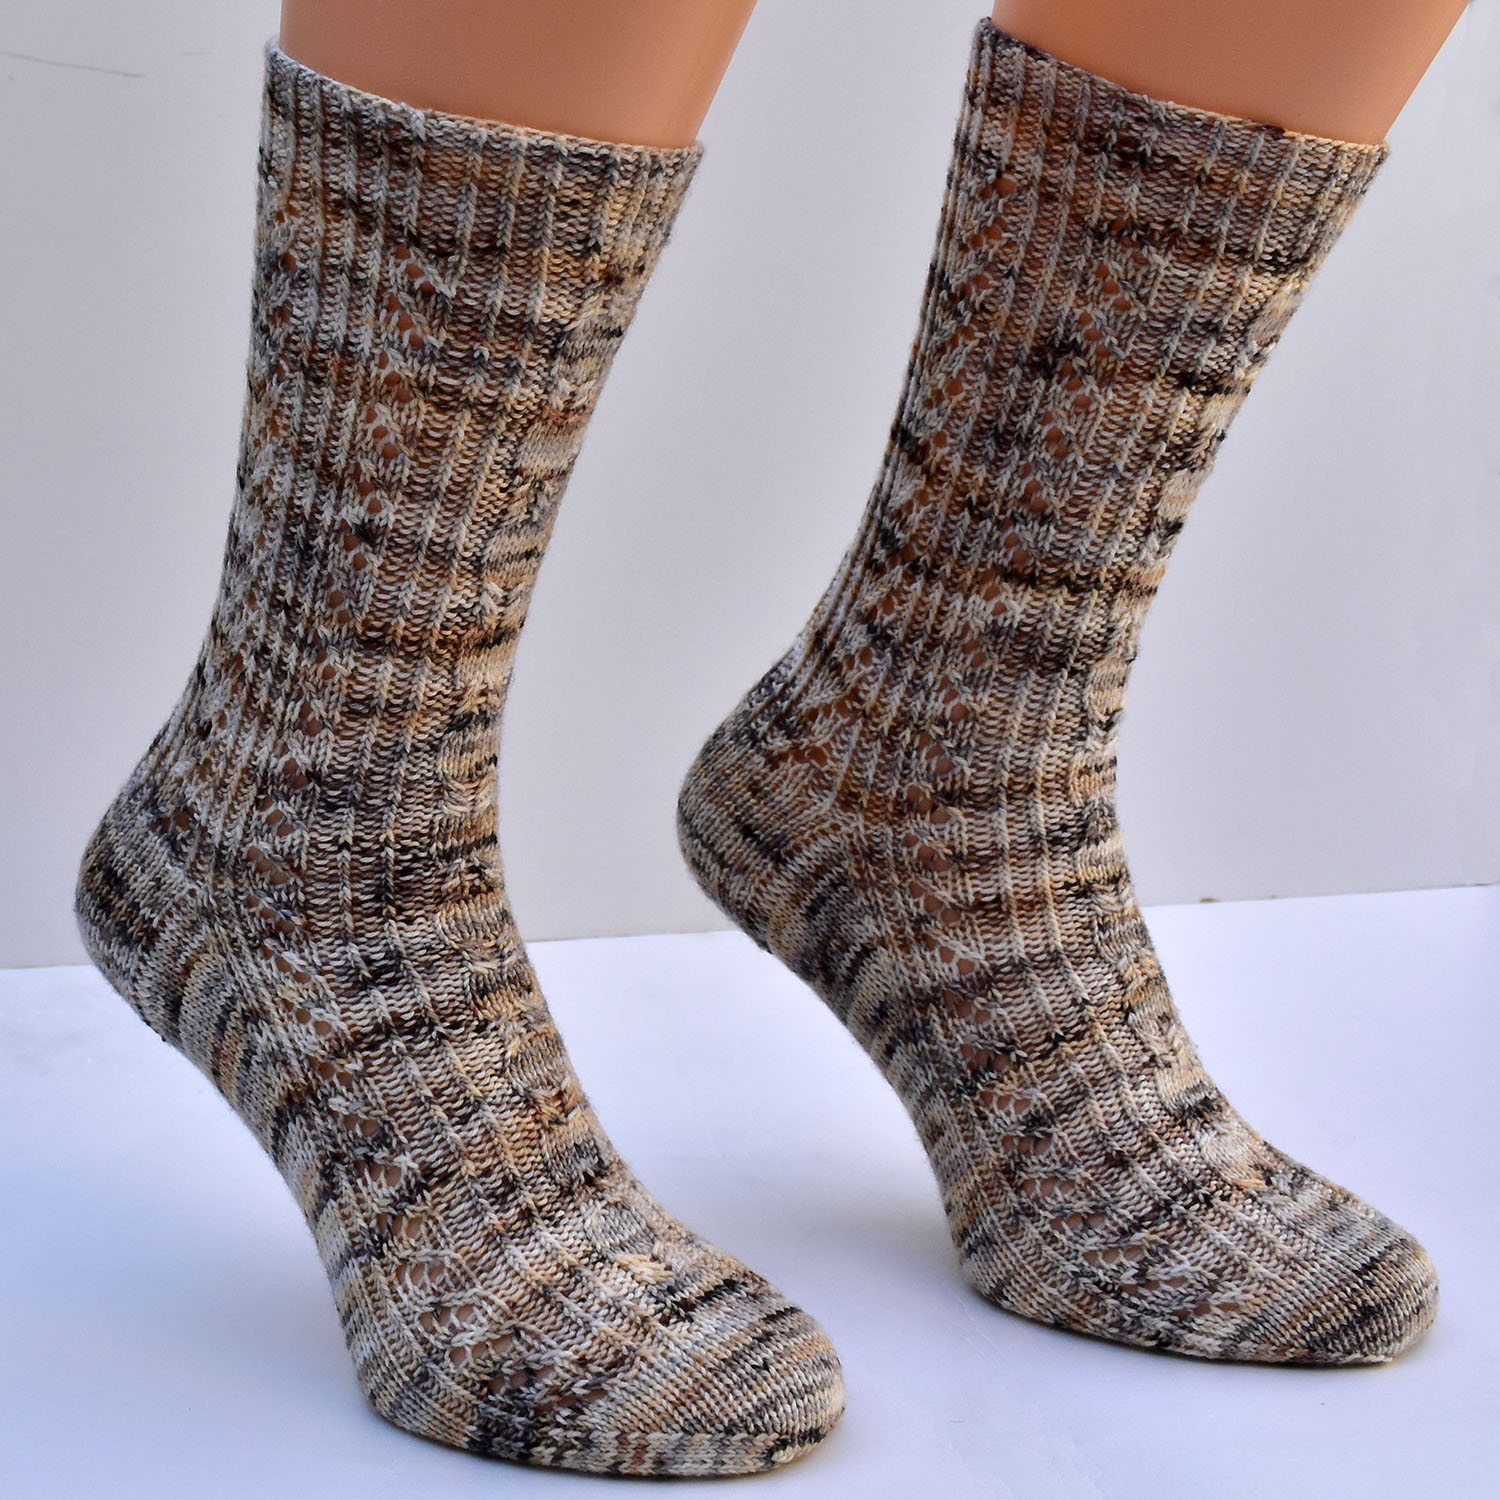 Witches' Sabbath sock pattern by Dots Dabbles